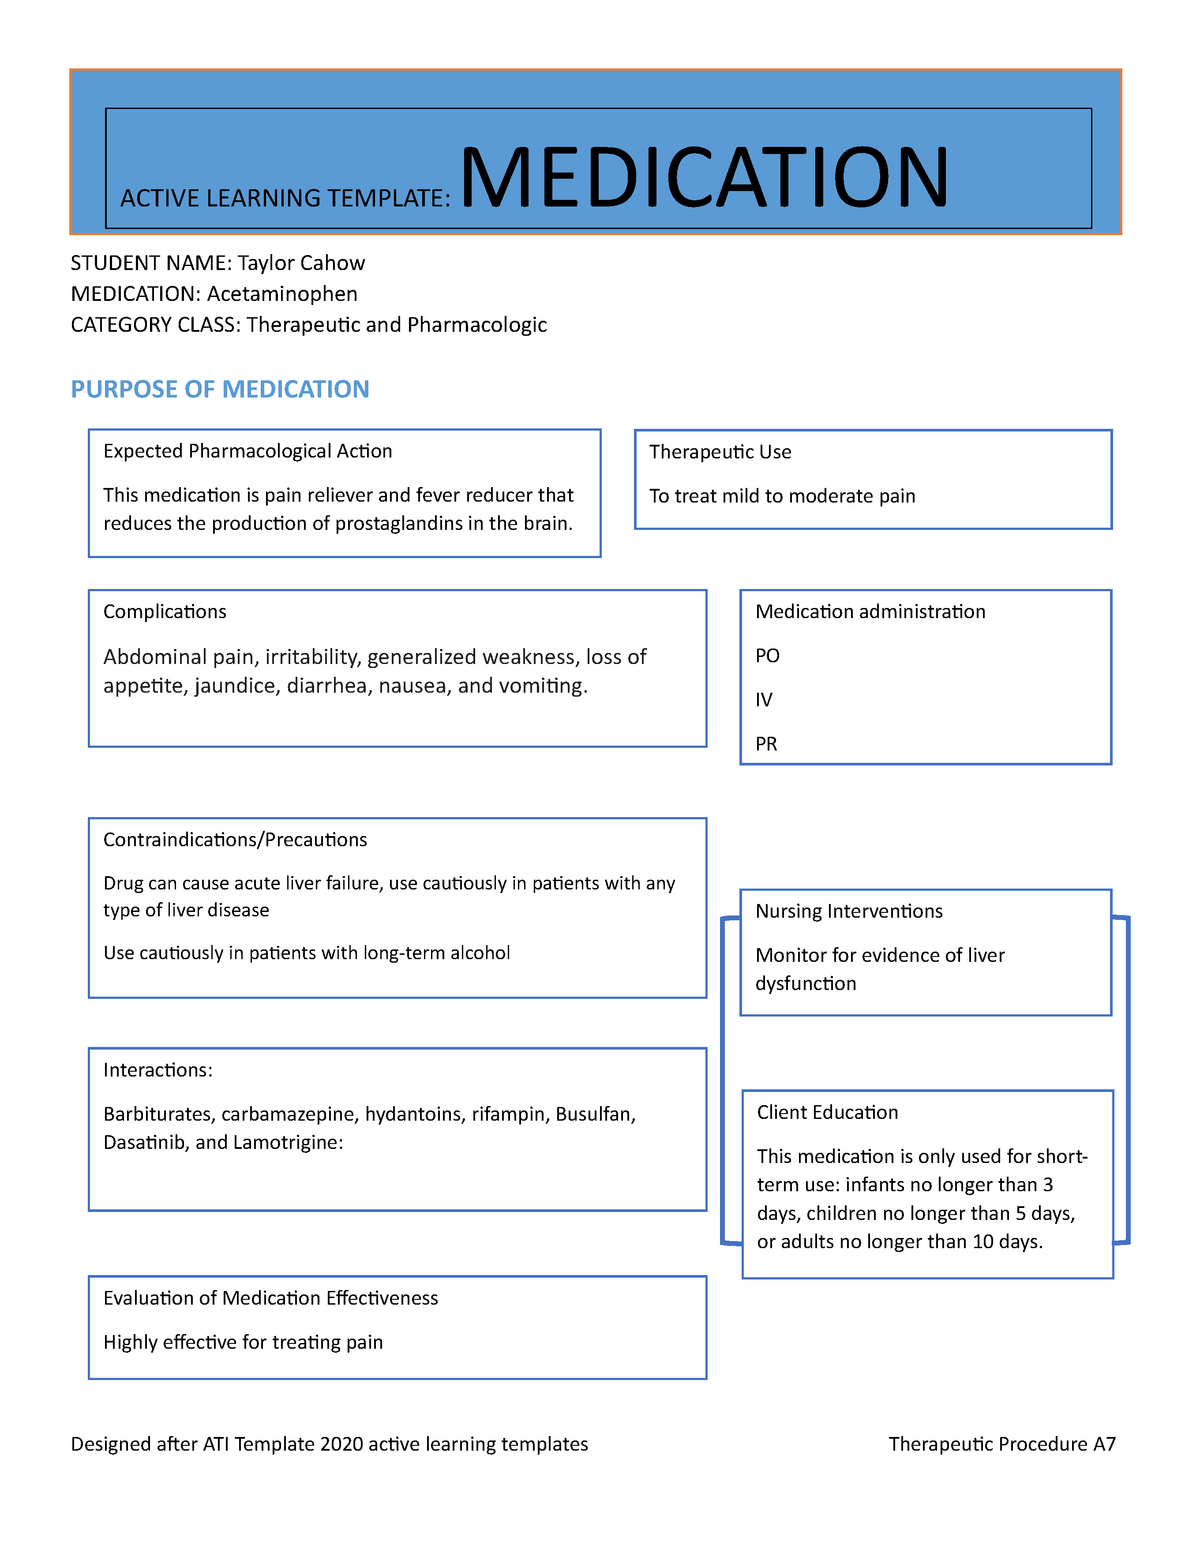 Medication Template Acetaminophen STUDENT NAME Taylor Cahow